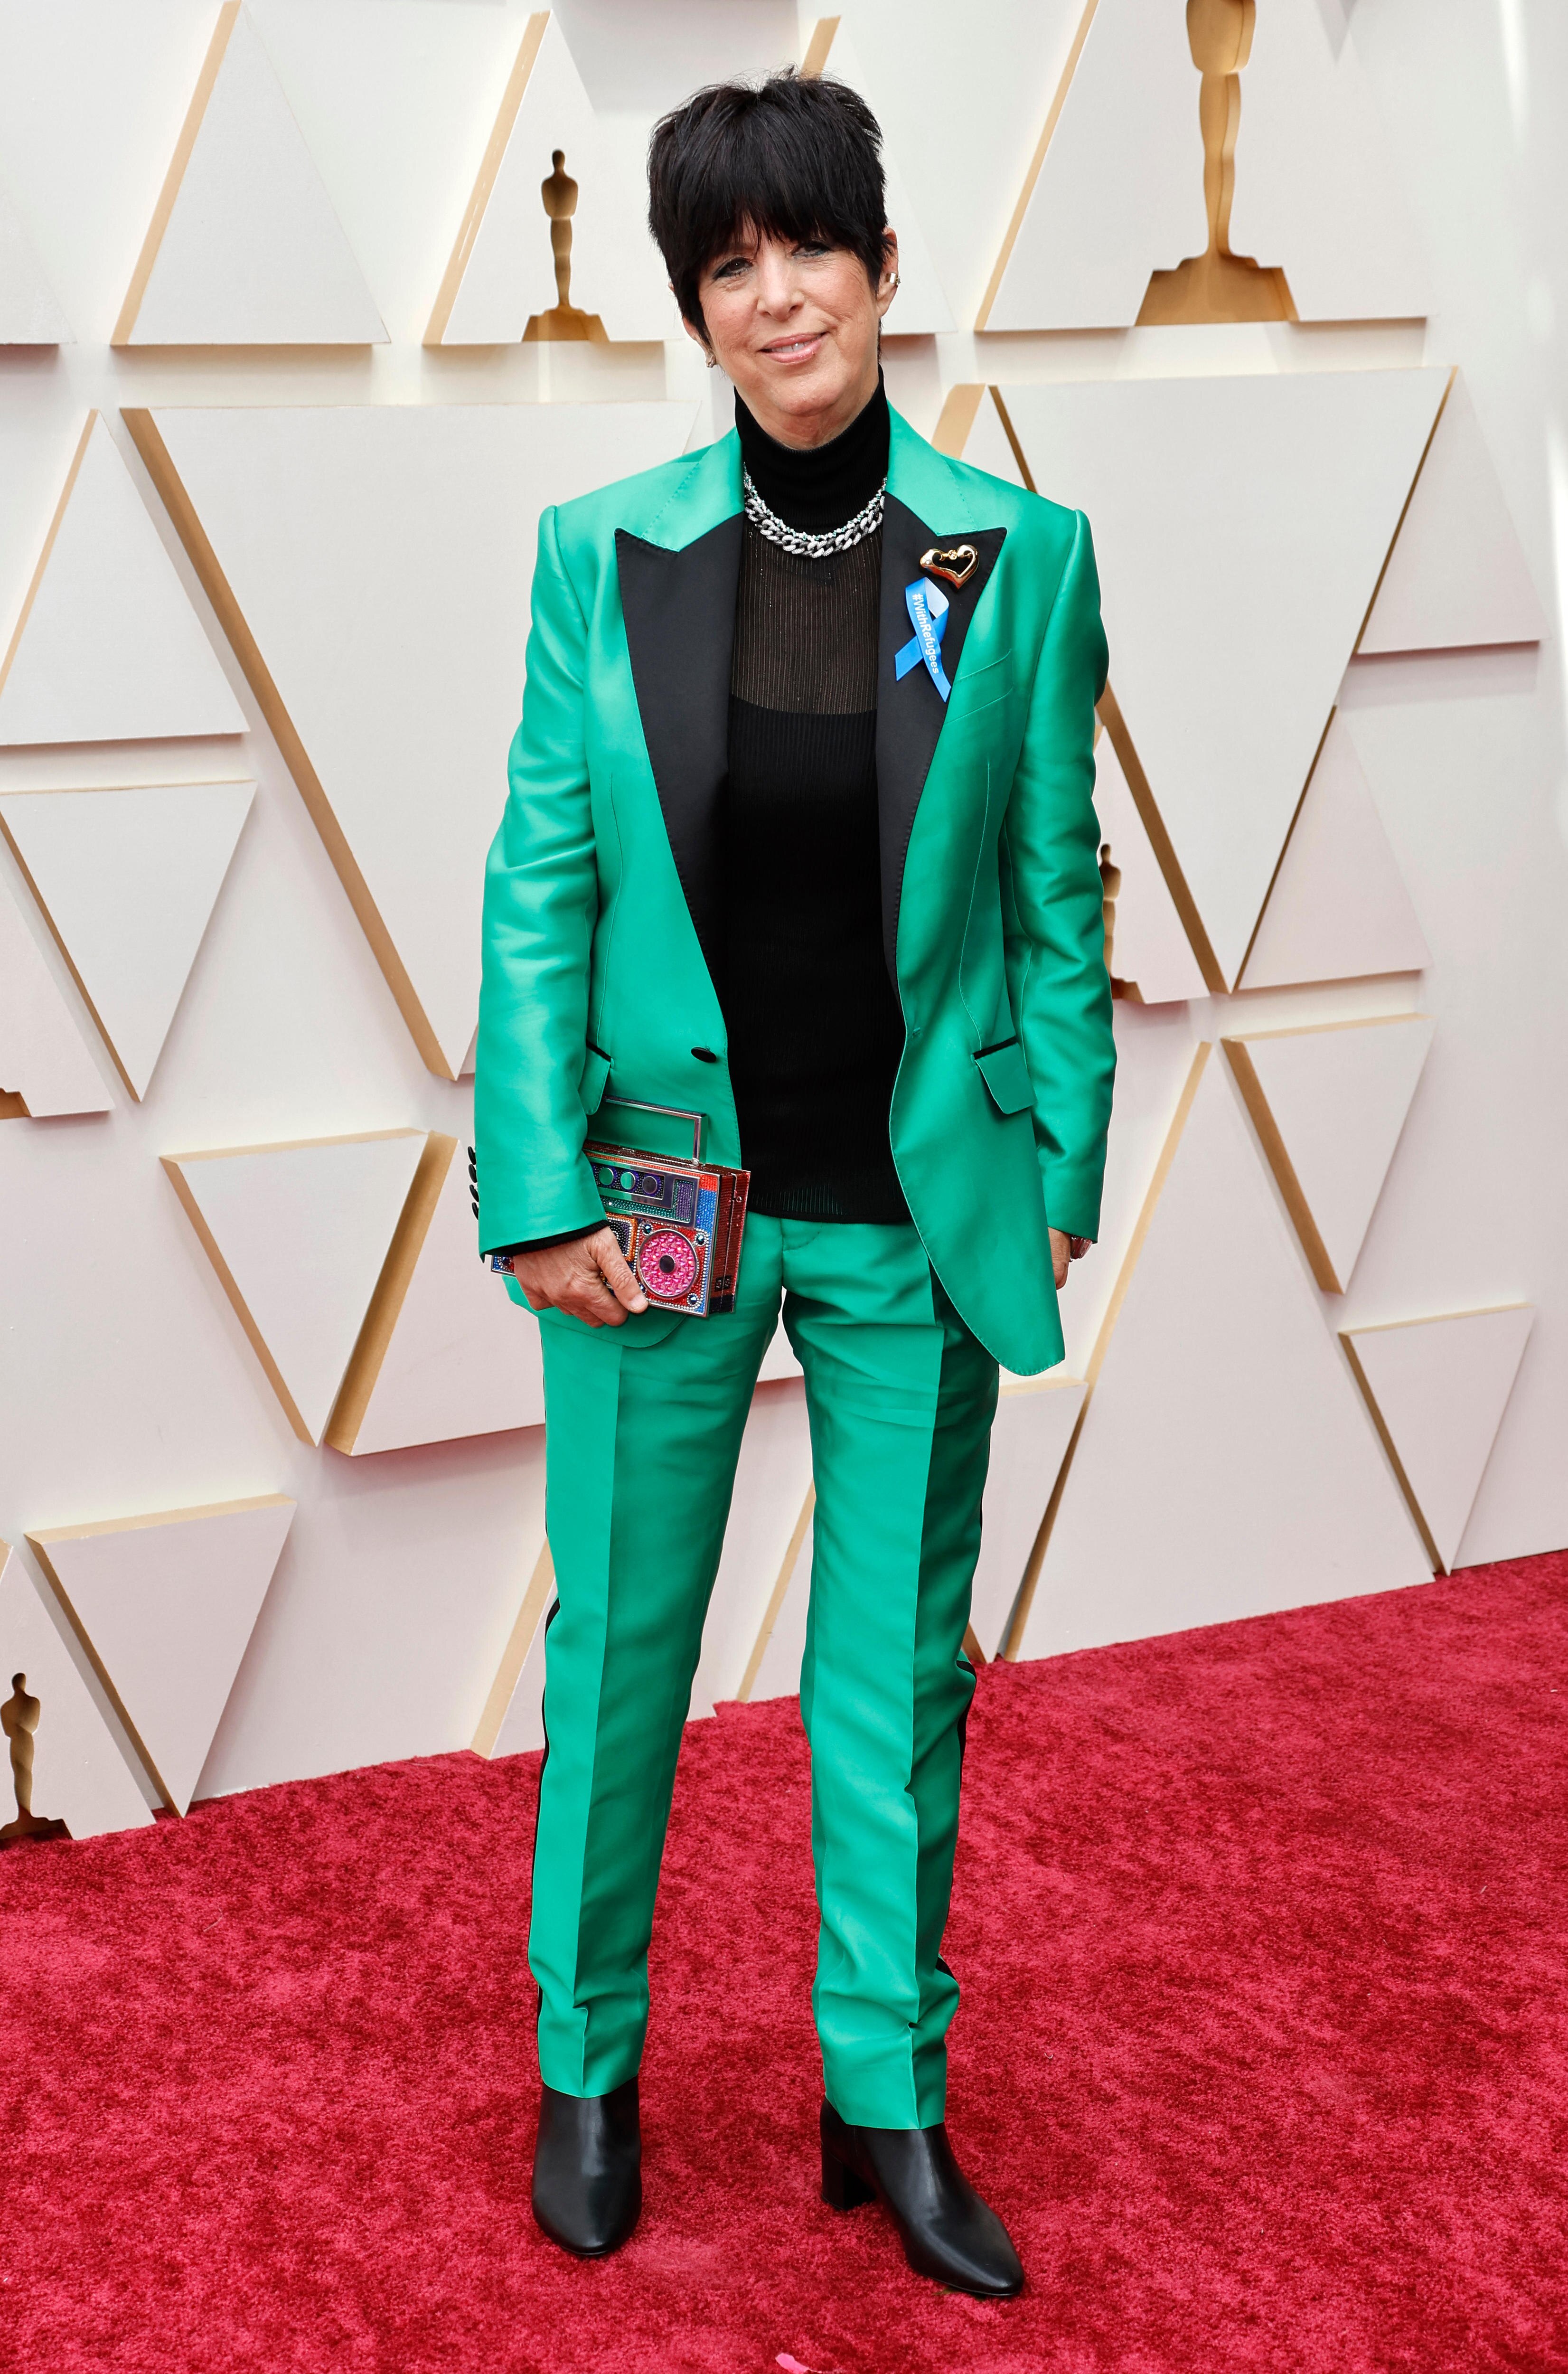 Musician Diane Warren stands on a red carpet, wearing a turquoise suit with a blue ribbon on its lapel.